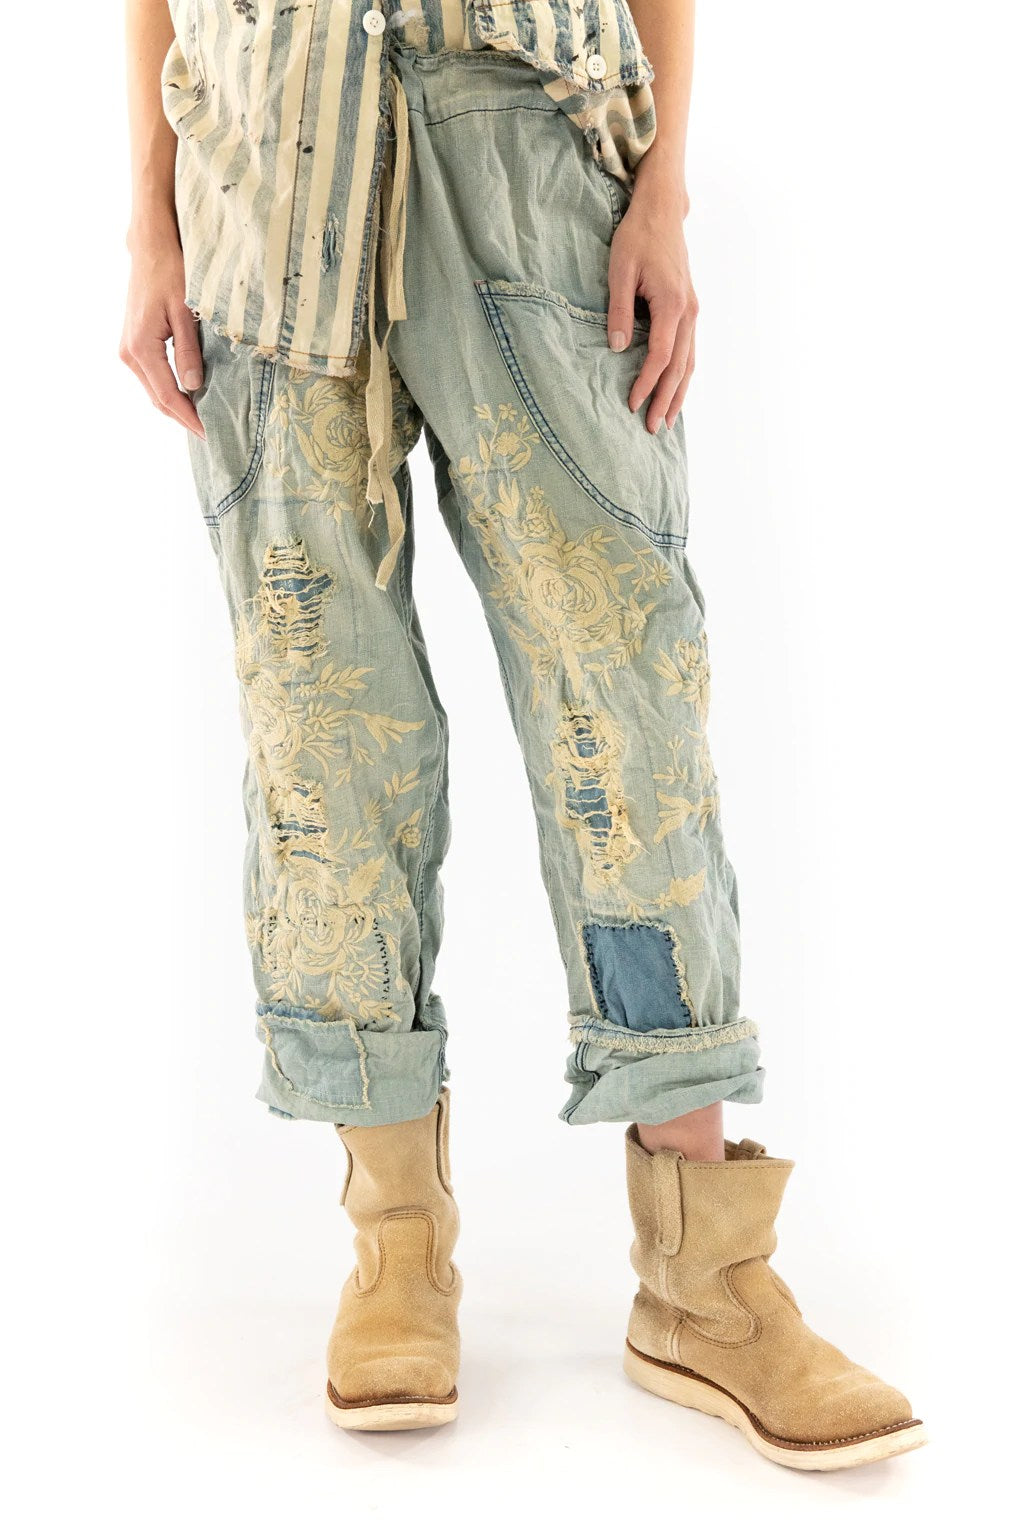 Floral Embroidered Okeefe Denim Pants by Magnolia Pearl